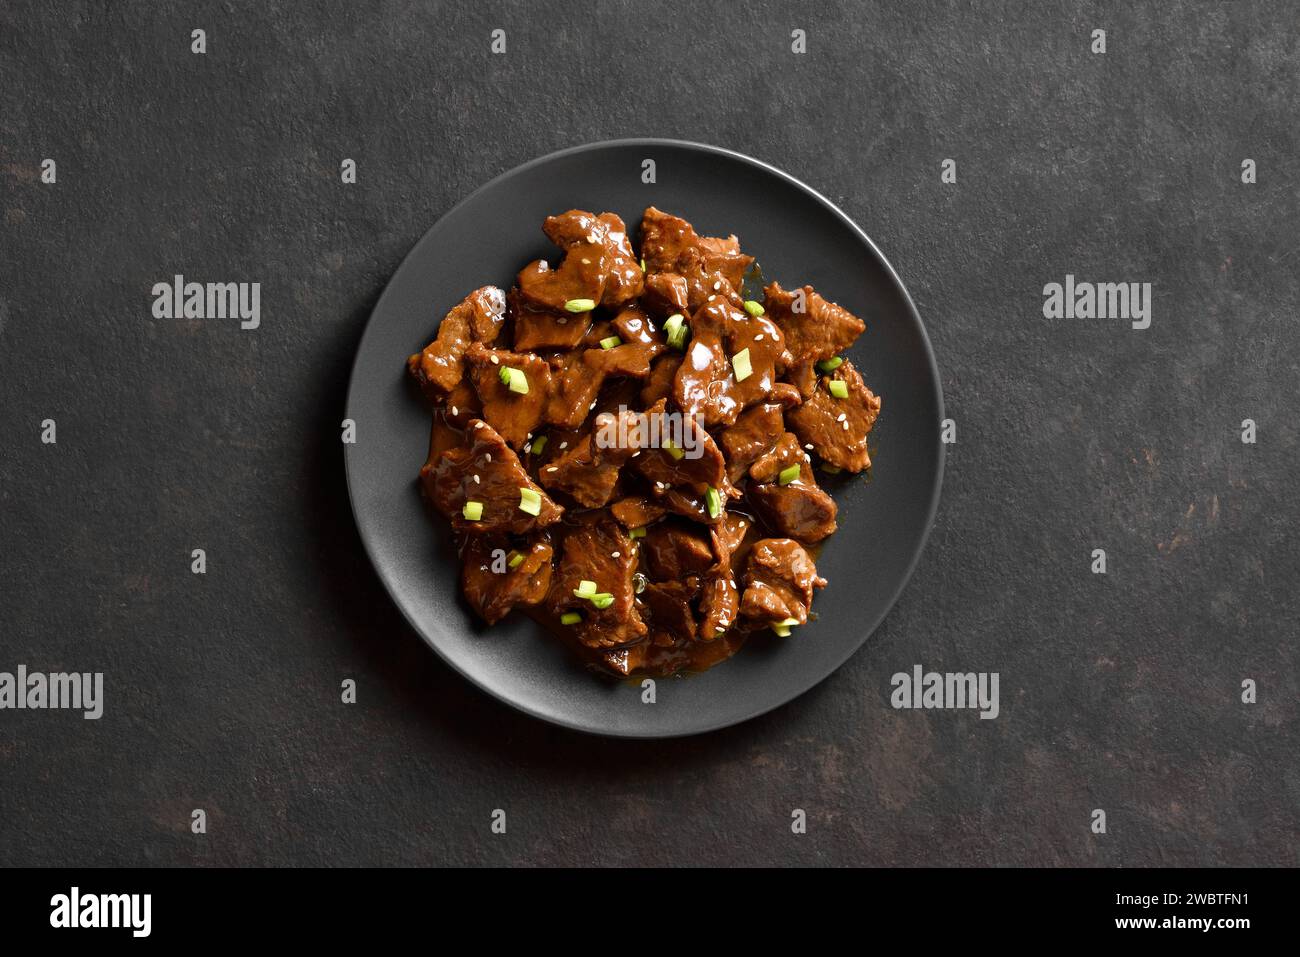 Asian style beef with soy sauce, green onion and sesame seeds on plate over dark stone background. Stir-fried beef dish. Top view, flat lay Stock Photo